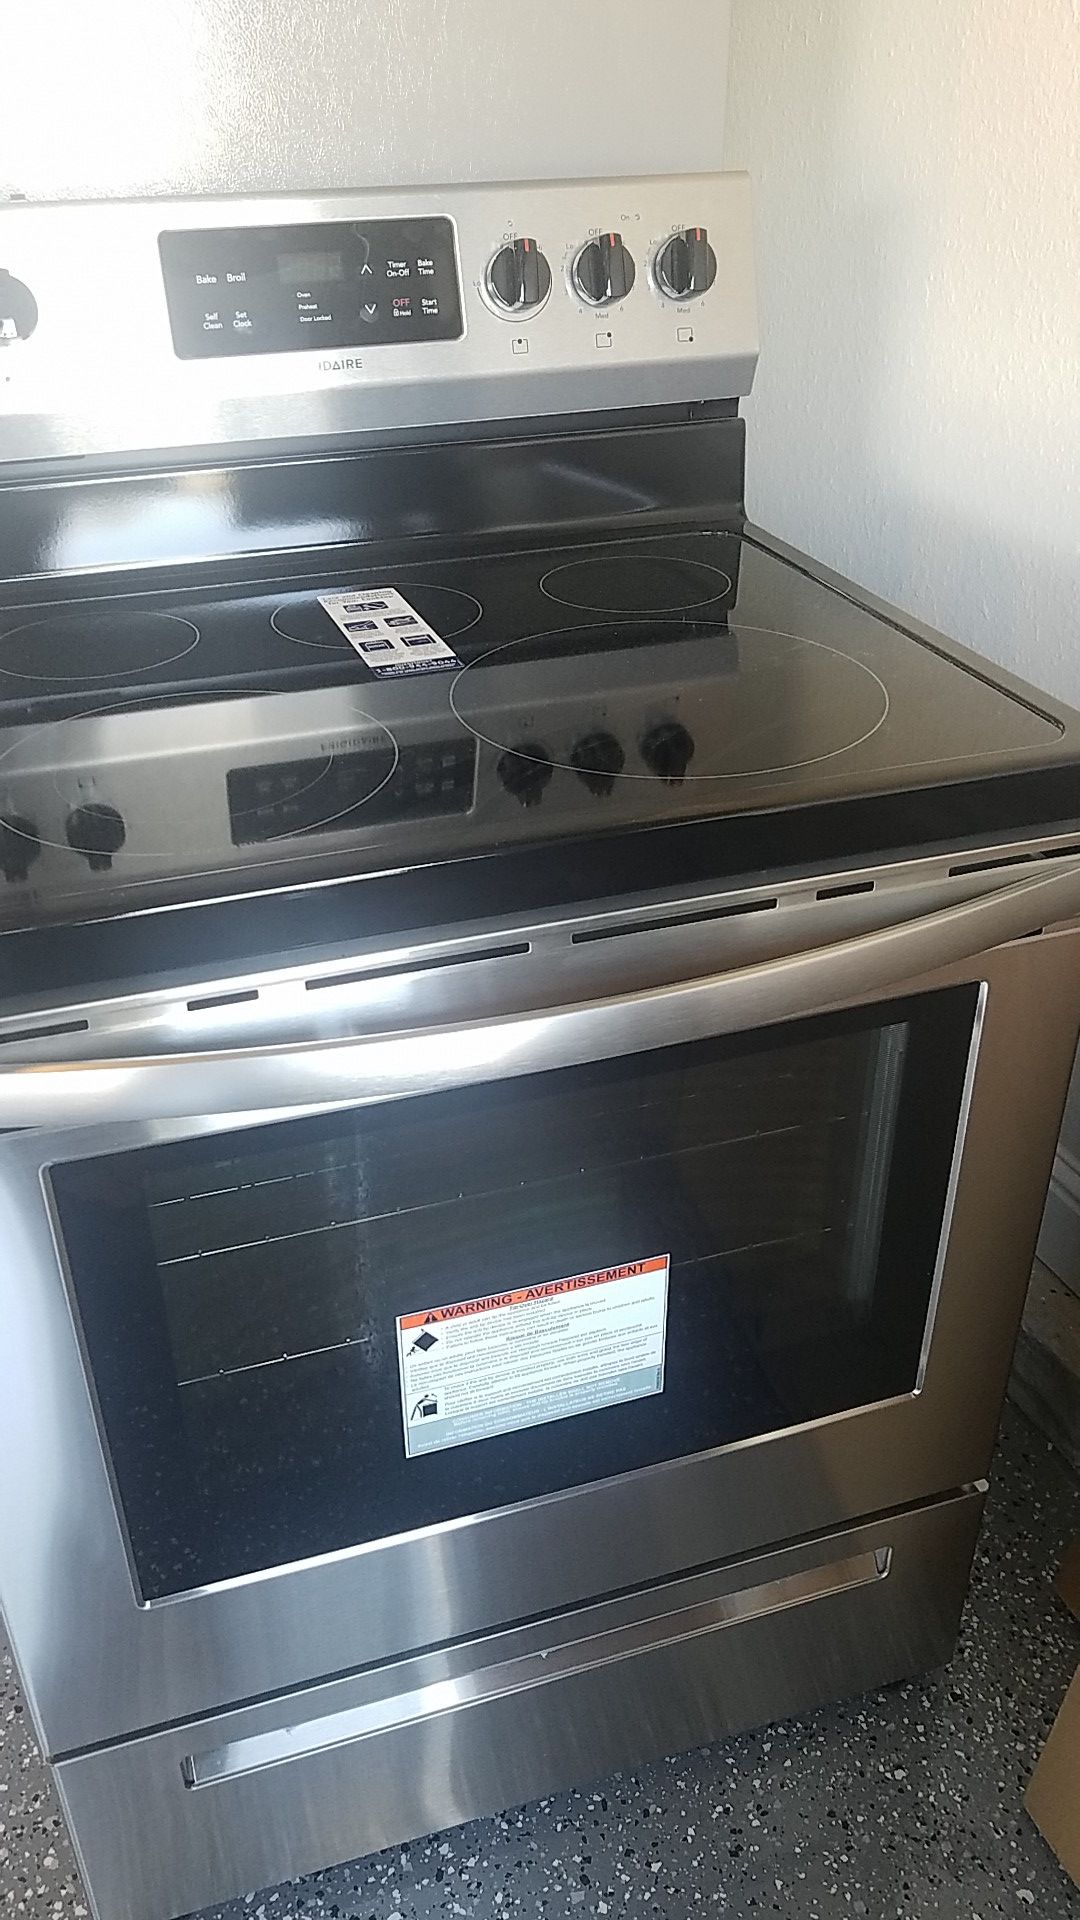 Brand new Fridgidare electric range and microwave never used.